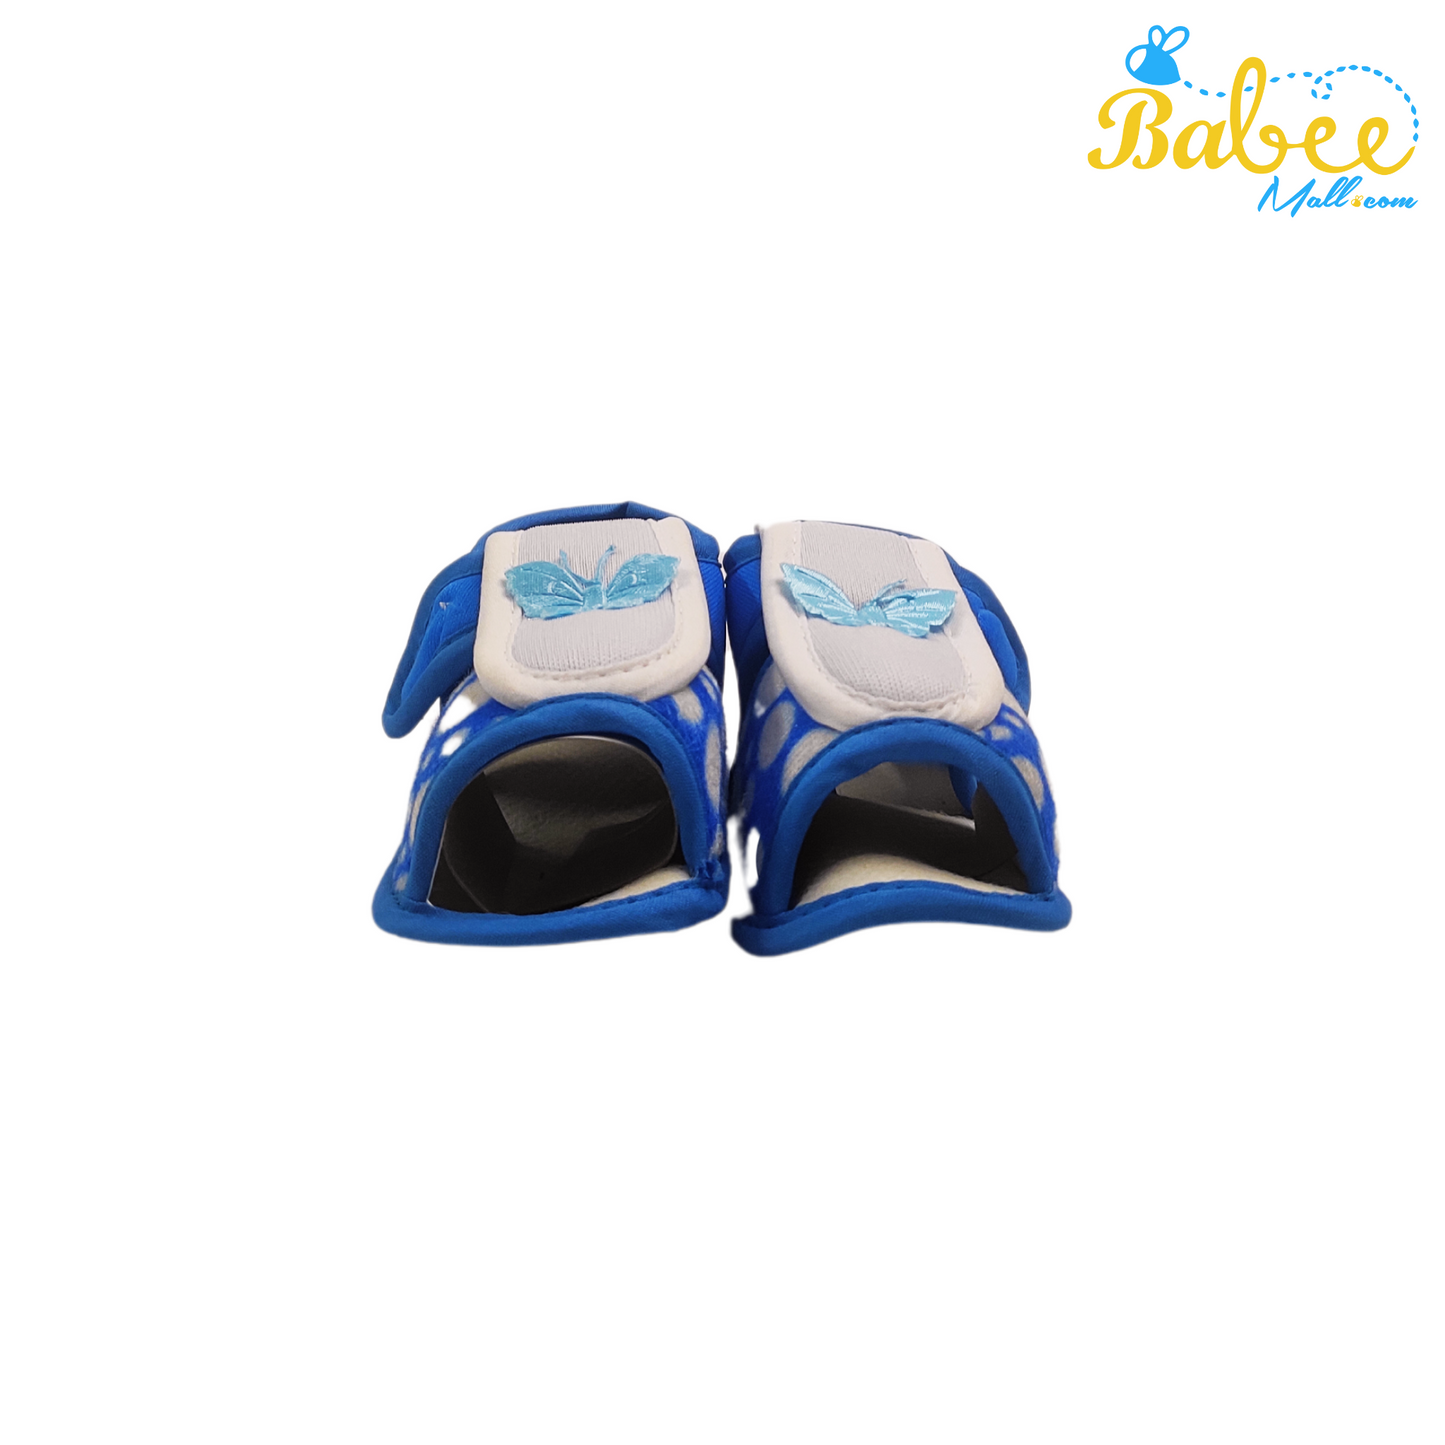 Fashion Newborn Baby Shoes - The Perfect First Steps in Style and Comfort 0-12 Month's (Blue Dot)